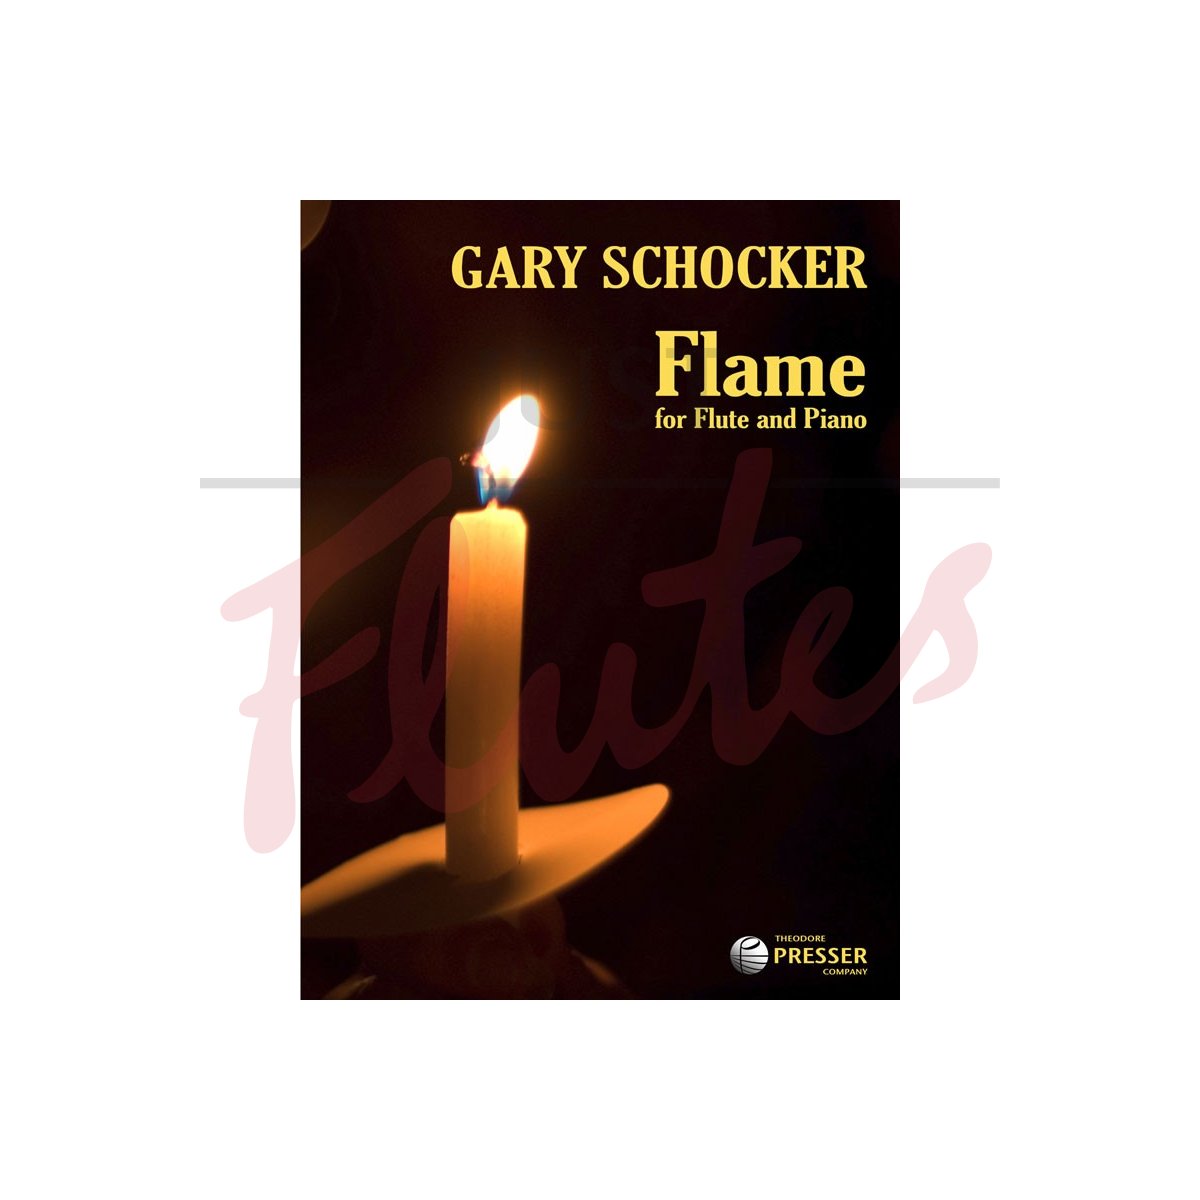 Flame for Flute and Piano